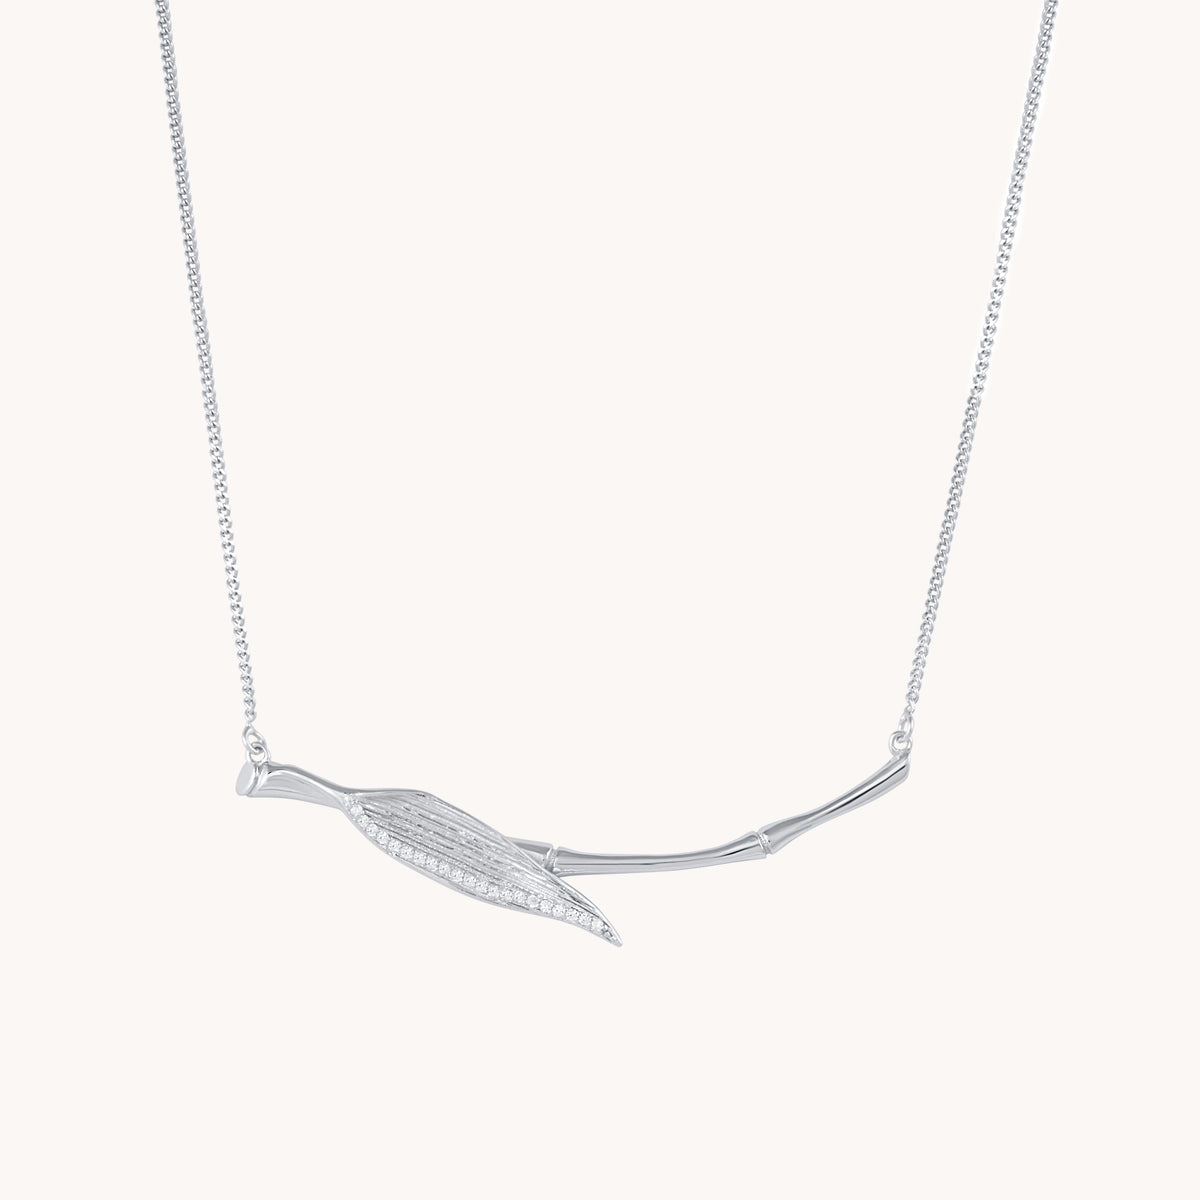 Bamboo Leaf Silver Necklace